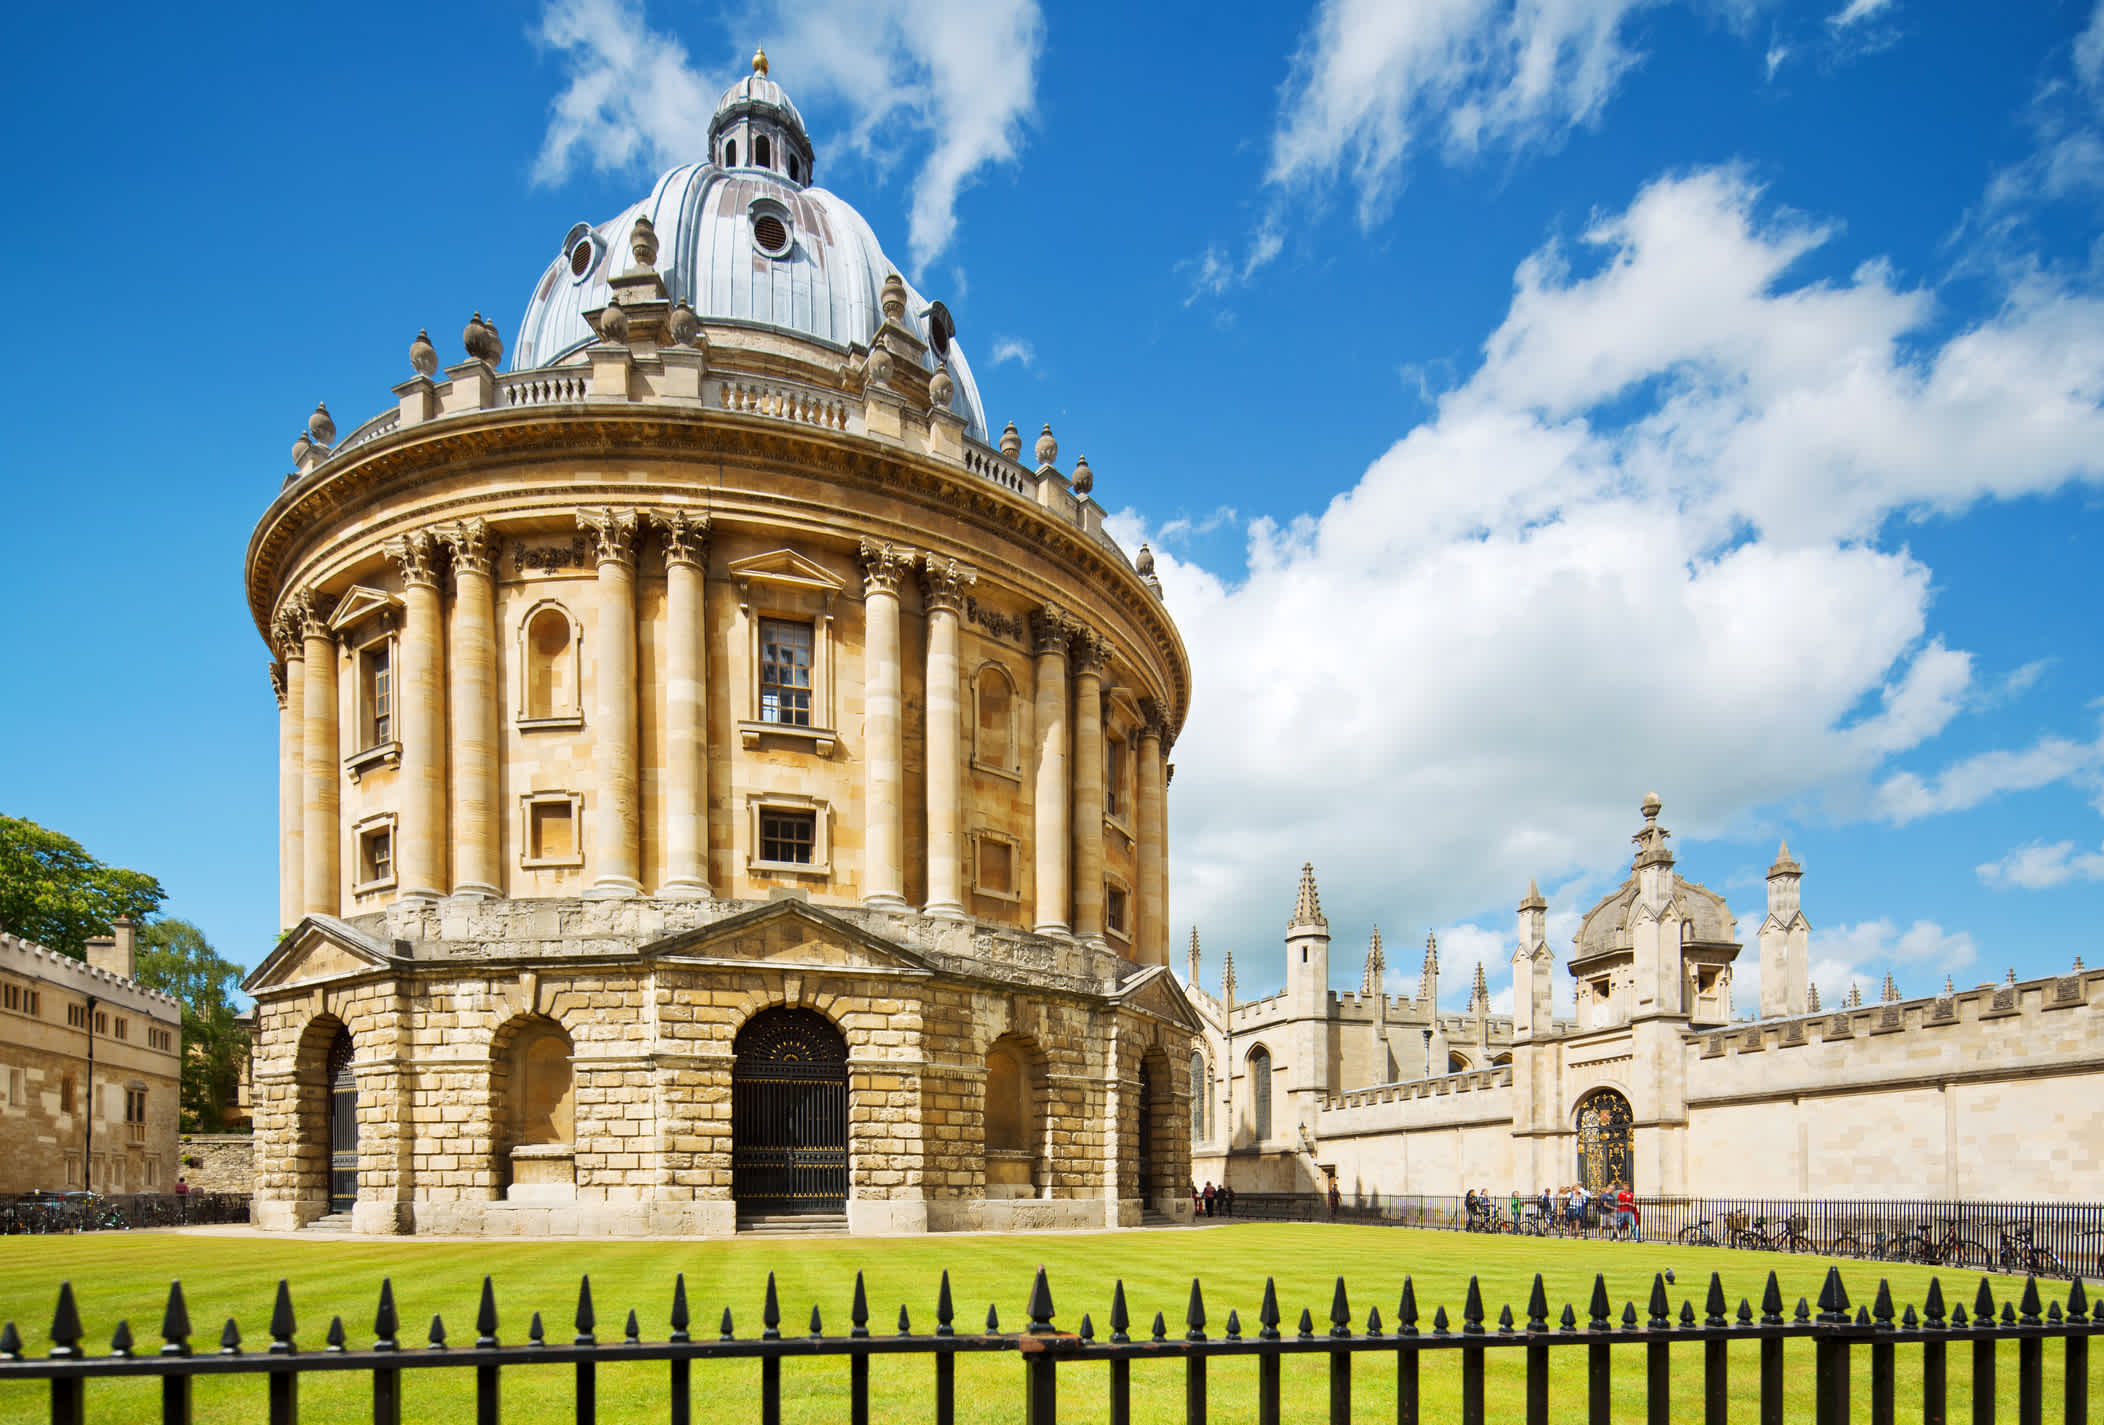 The Radcliffe Camera in Oxford, UK.